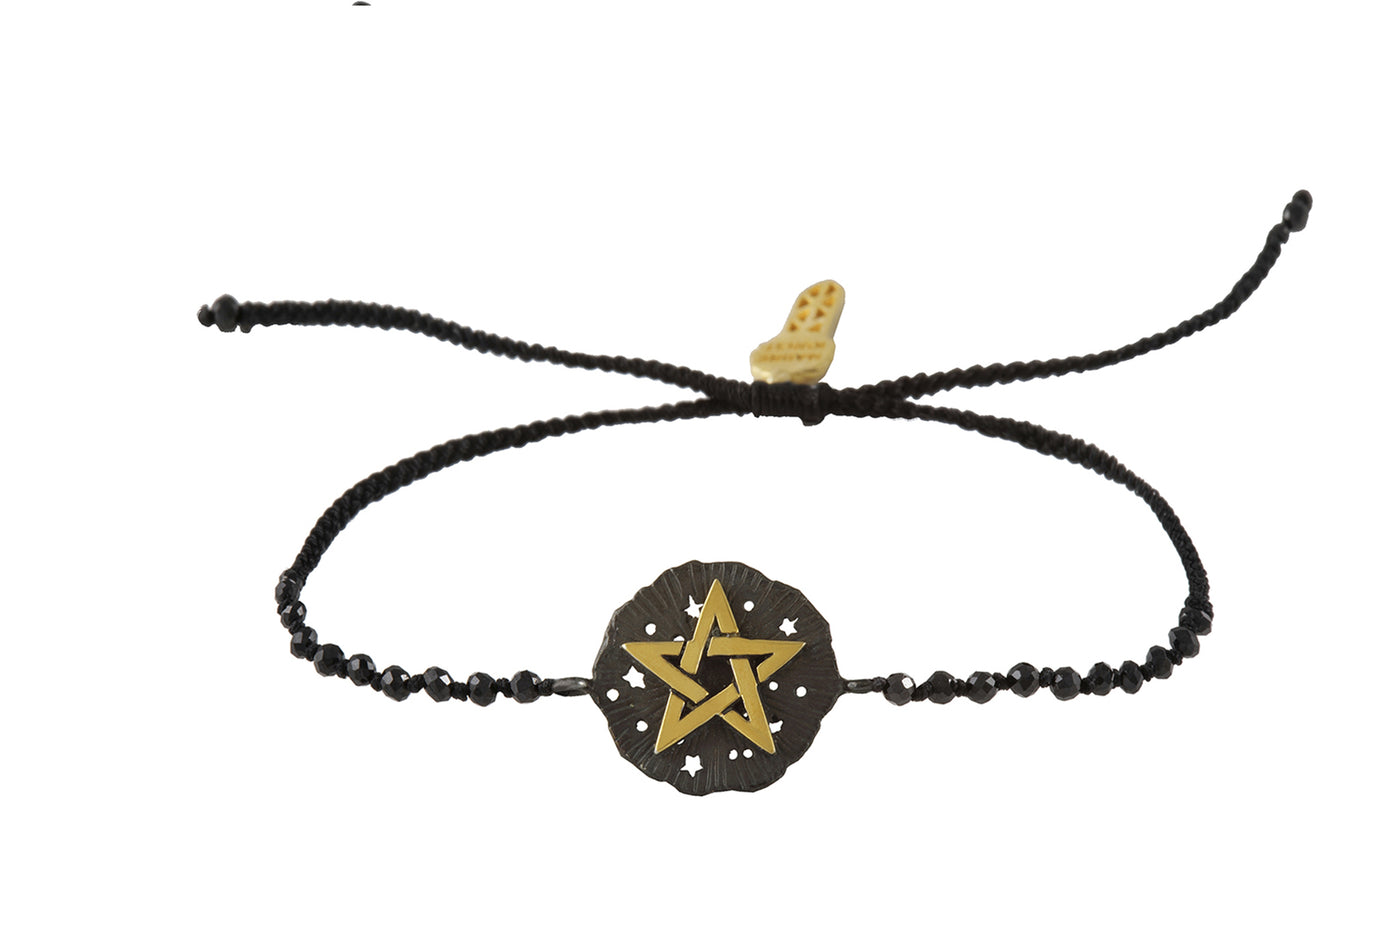 Pentagram medallion talisman bracelet with beads. Gold plated and oxide